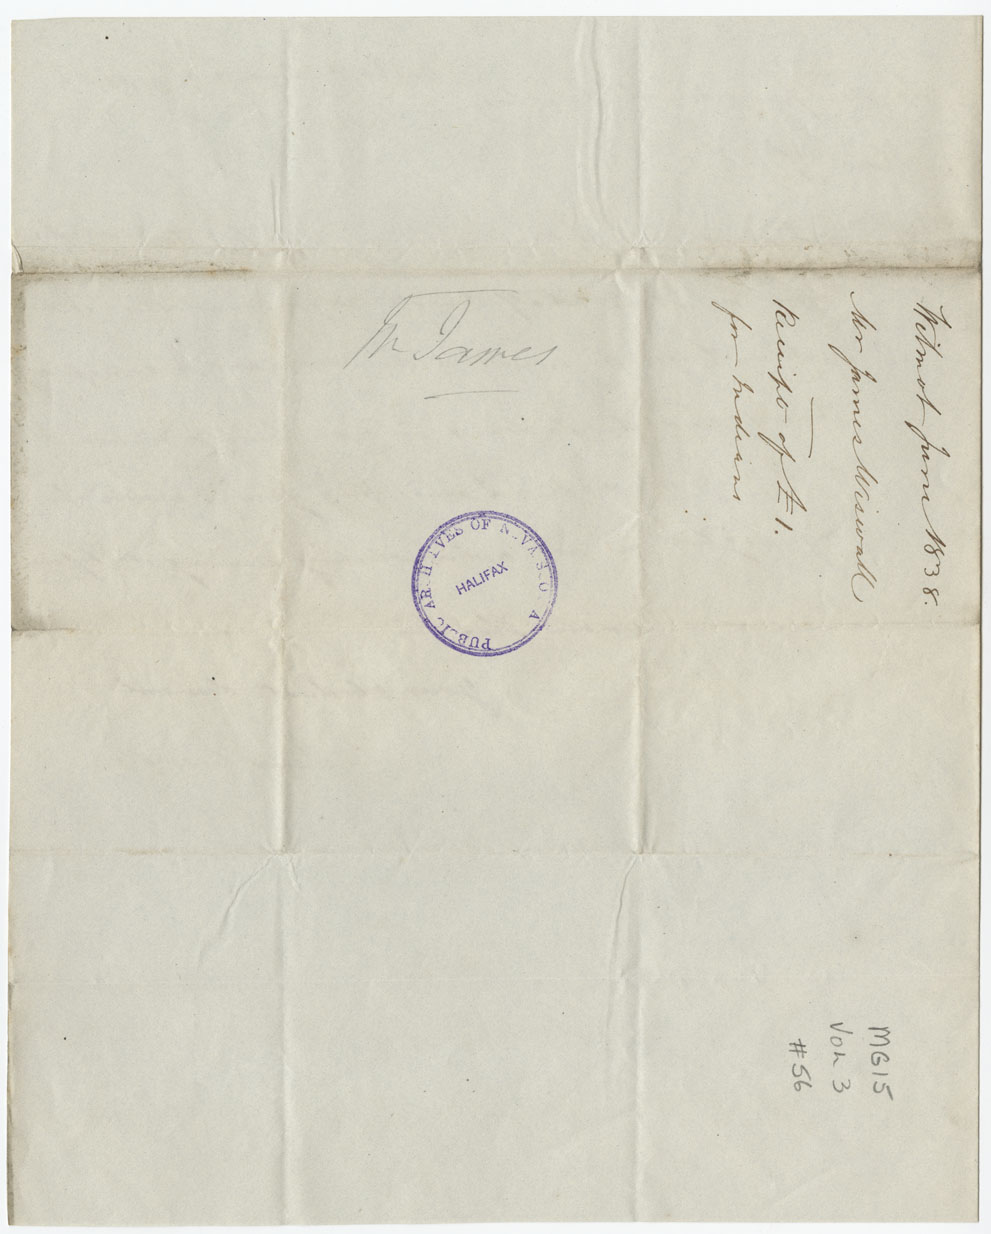 Receipt of £1-0-0 for Mi'kmaq by James Wiswell of Wilmot. 